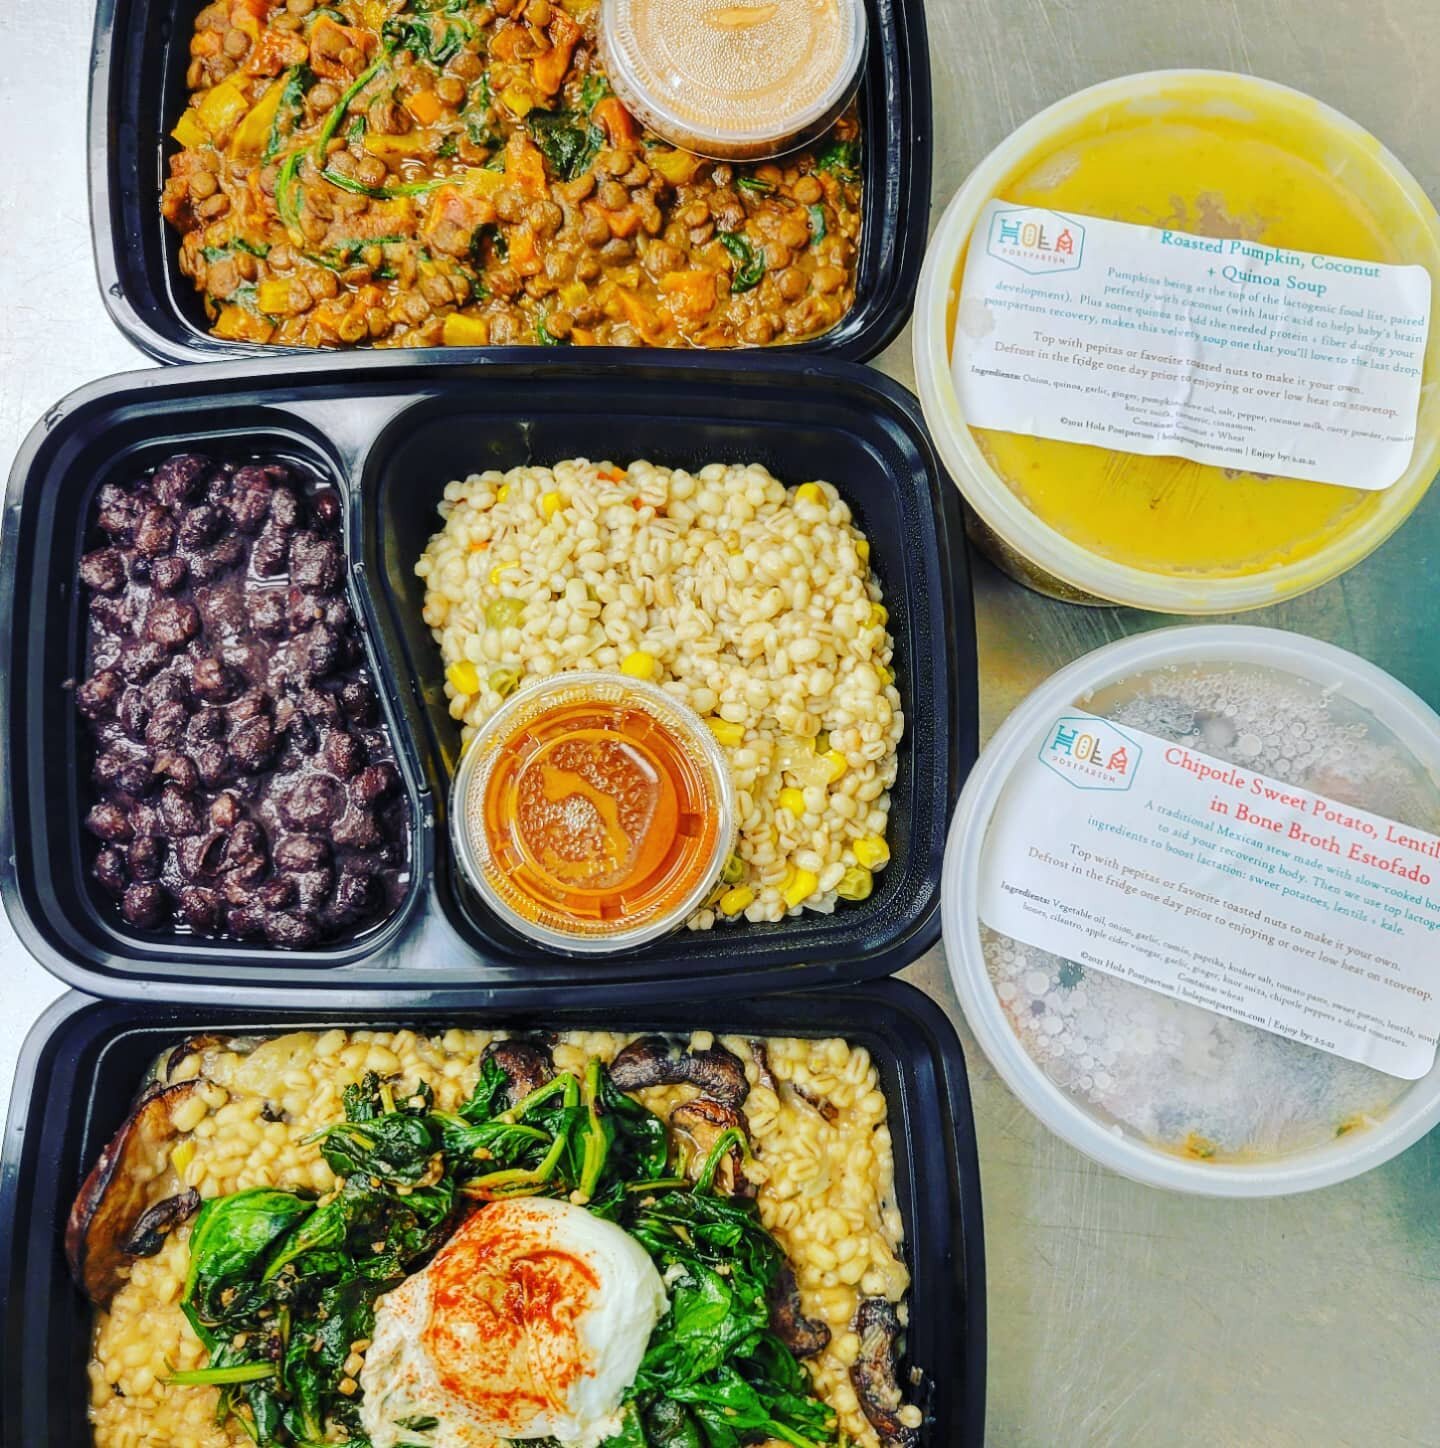 Hola Delicious! Our new Posparto Bueno Meal Bundle is here and is filled with 5 meals to fully nourish your postpartum healing.💃
.
Intentional ingredients to aid the healing of your womb + to boost your milk supply. You choose the two soups to go al